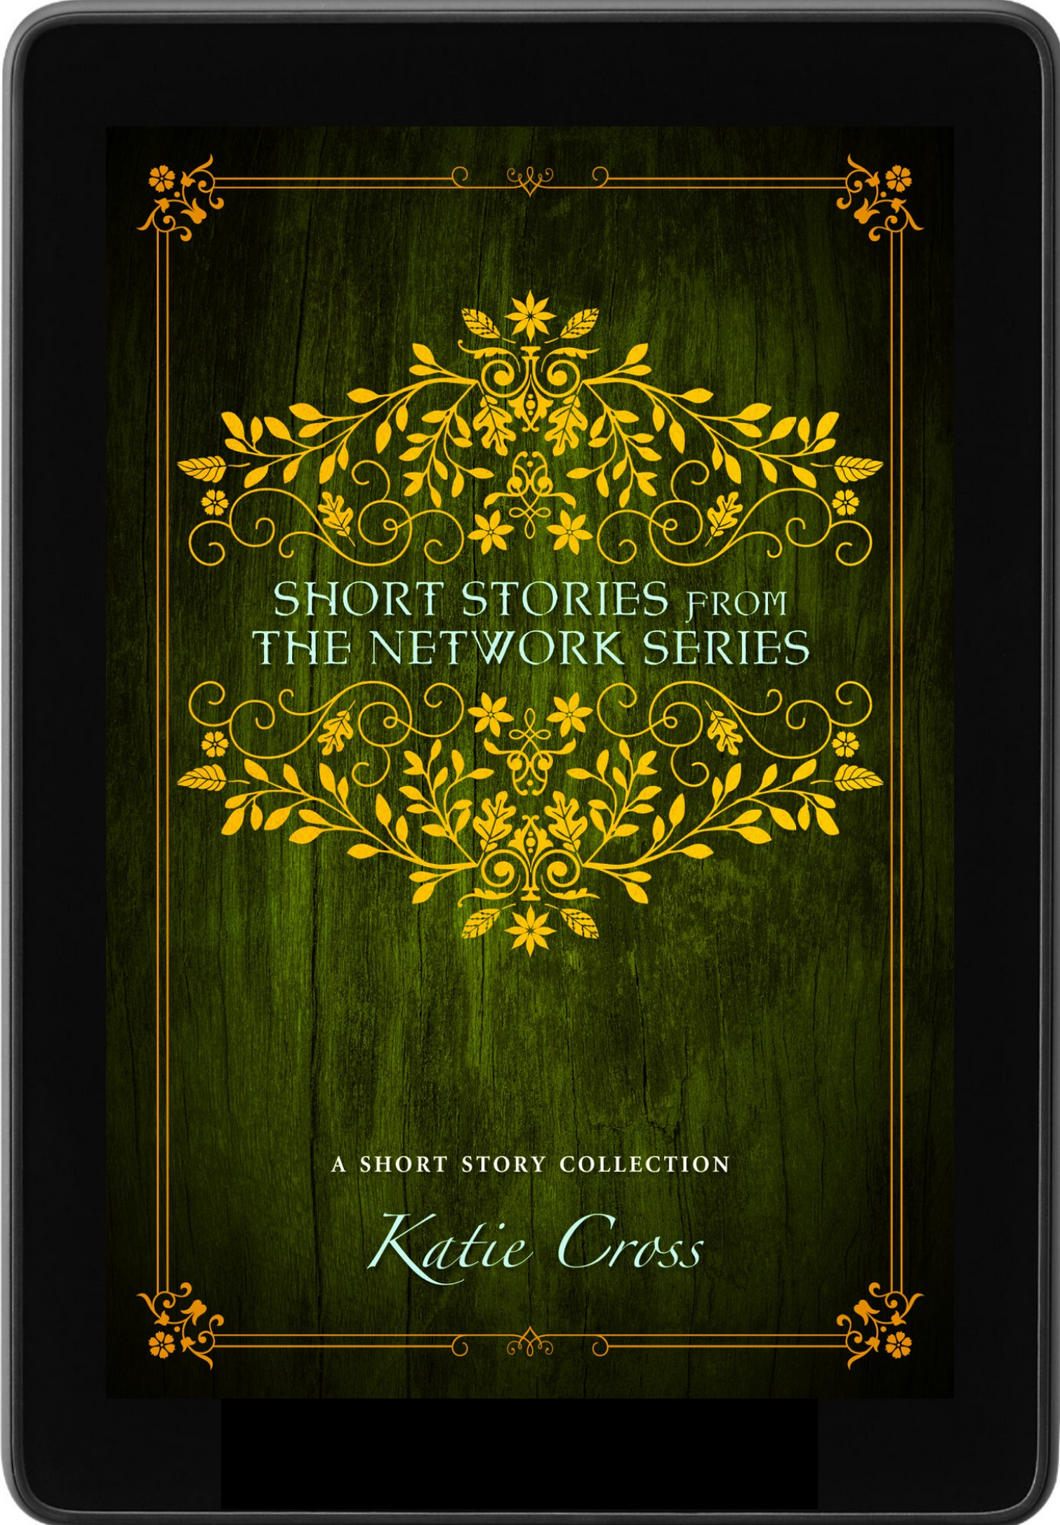 Short Stories from the Network Series - Katie Cross